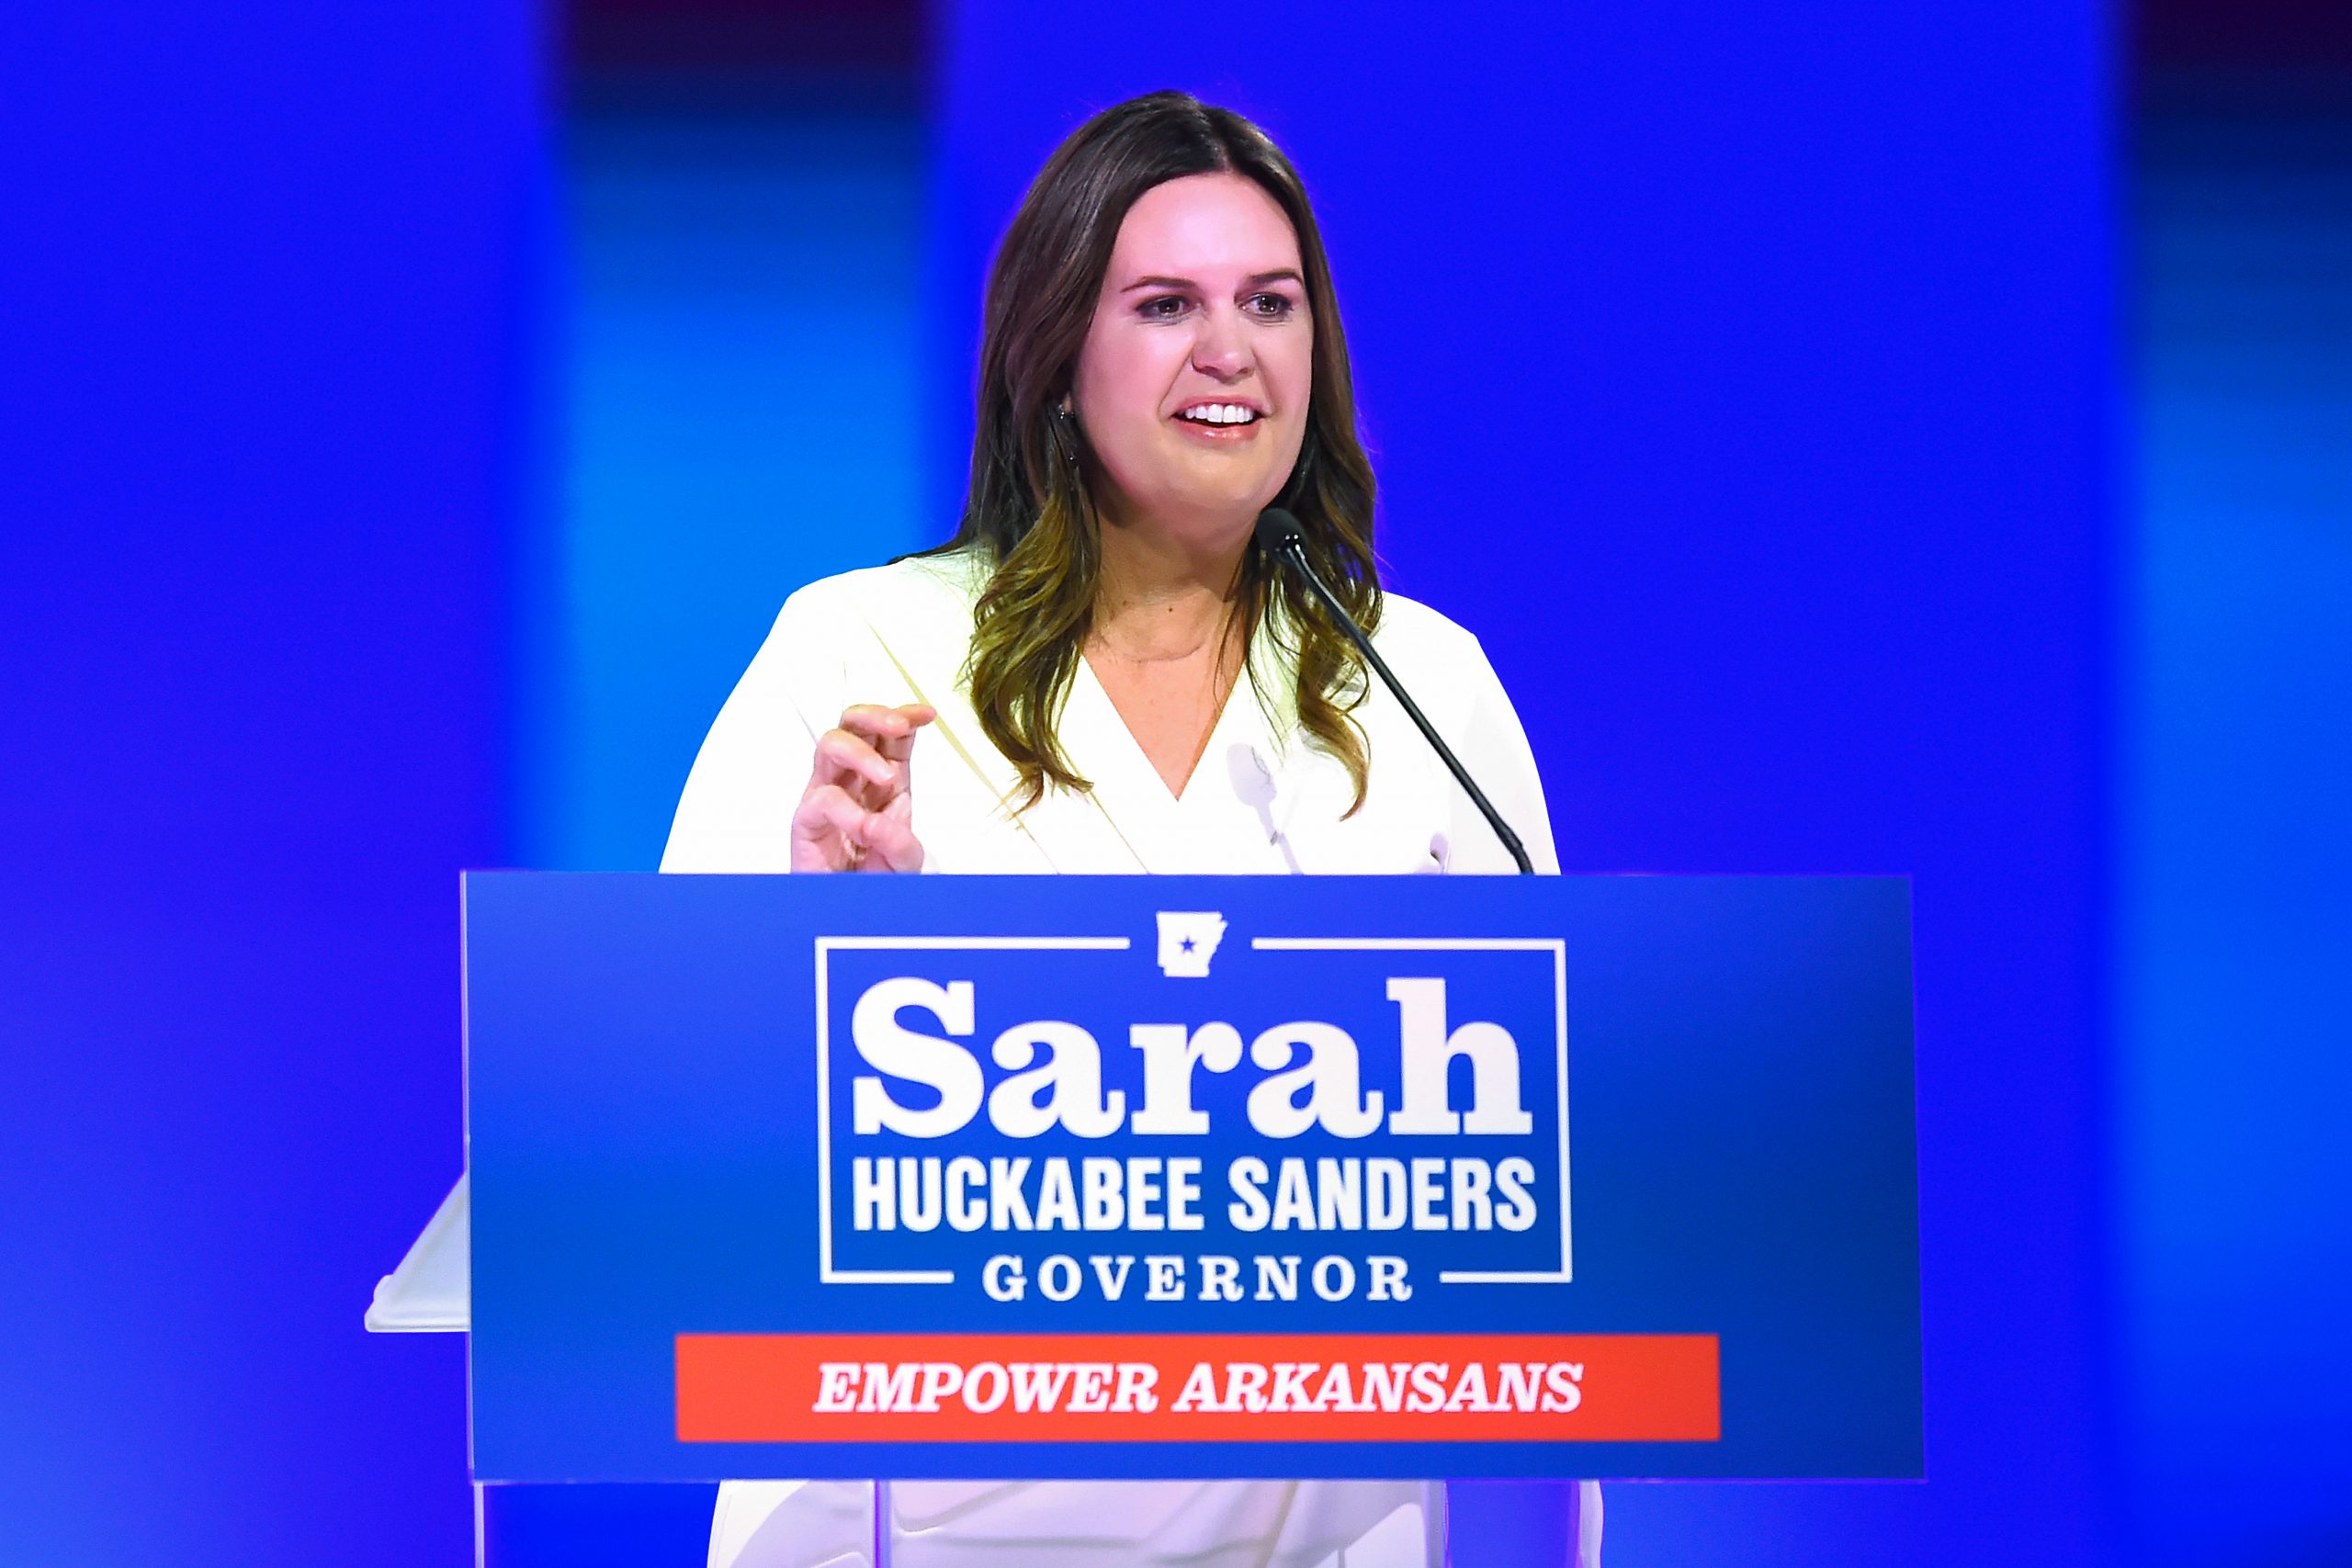 US midterms 2022: Sarah Huckabee Sanders, the first woman elected Arkansas governor